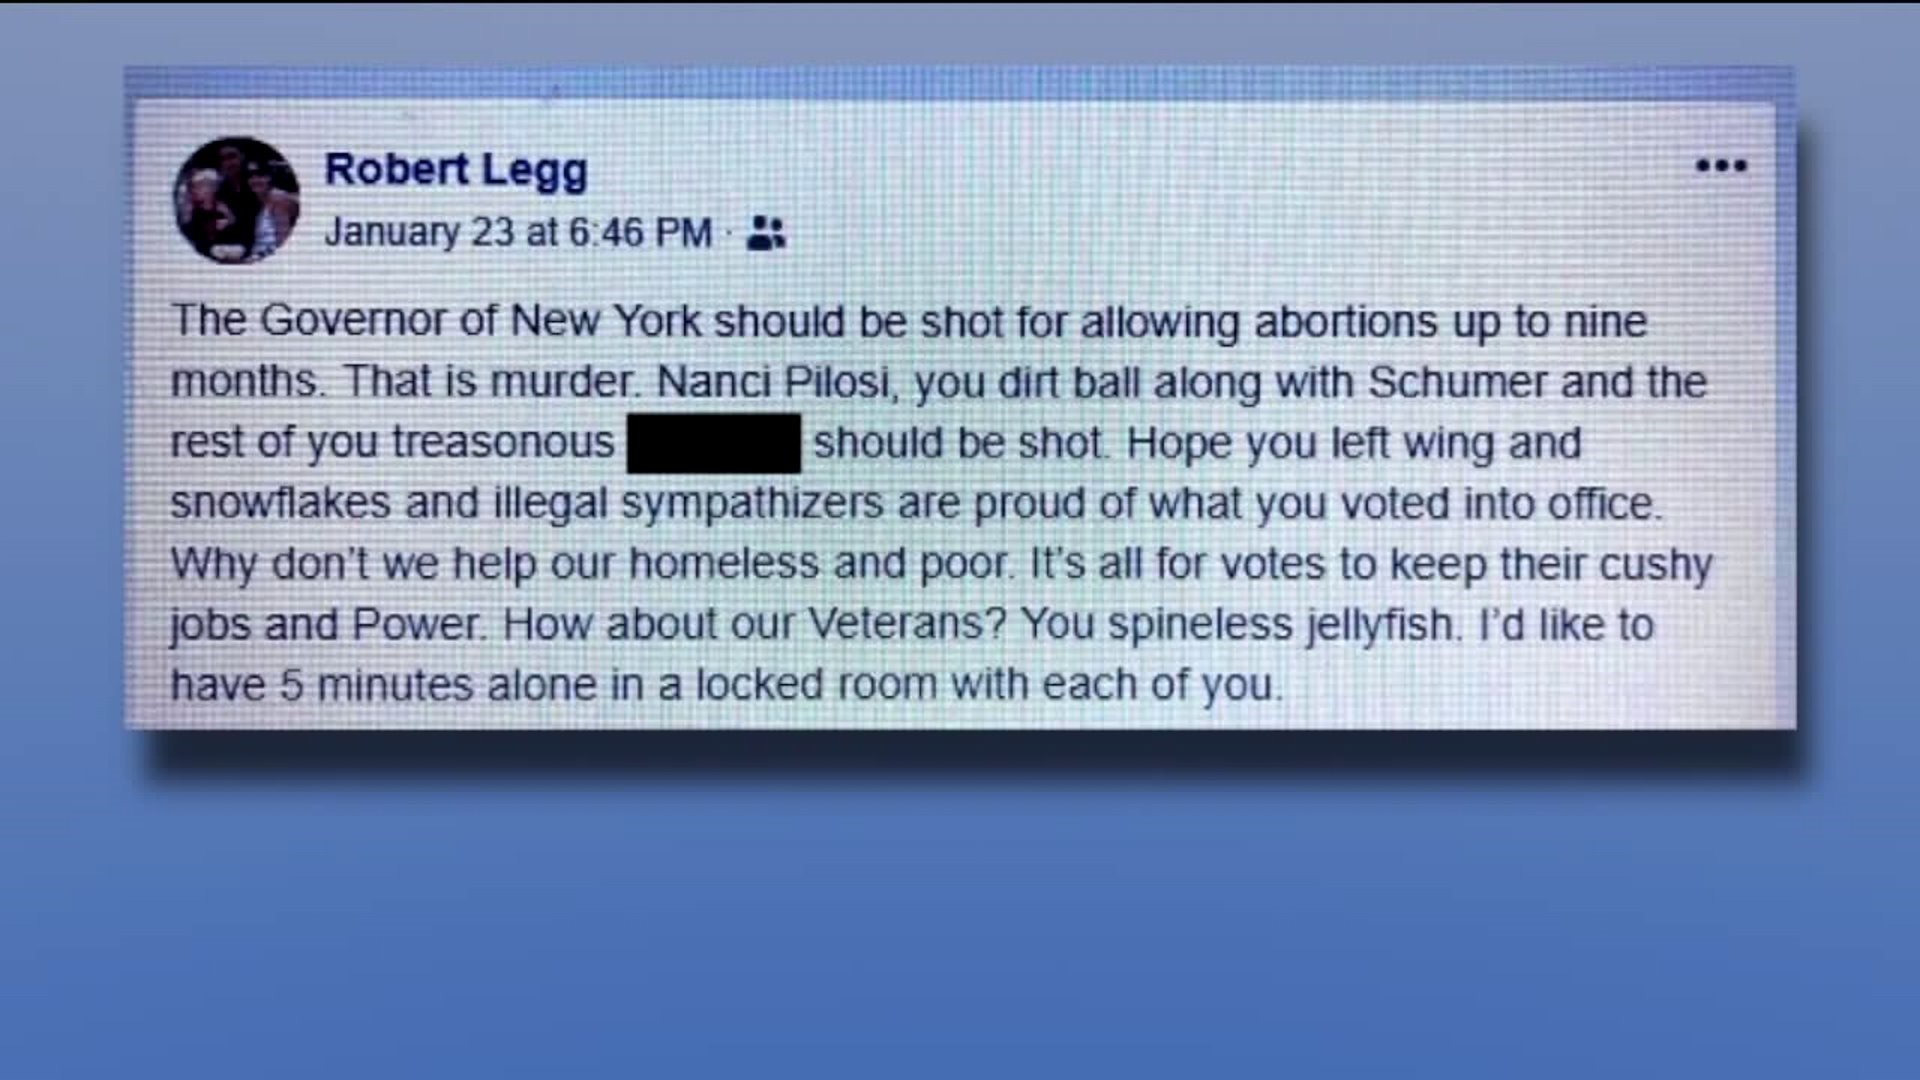 Old Forge Mayor's Facebook Post Calls for High-profile Democrats to be Shot